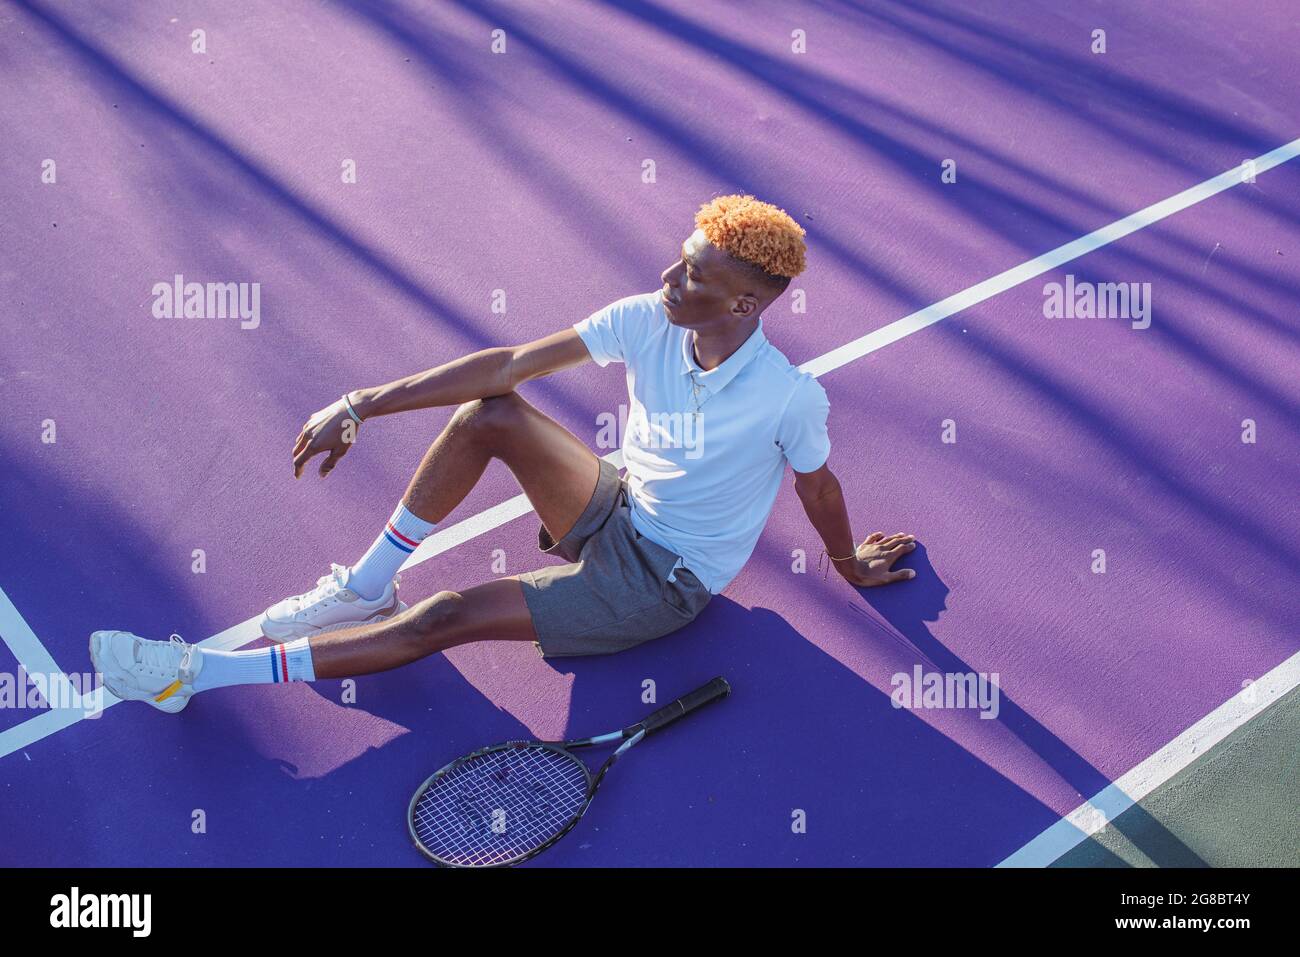 Young man resting on tennis court with racket next to him Stock Photo